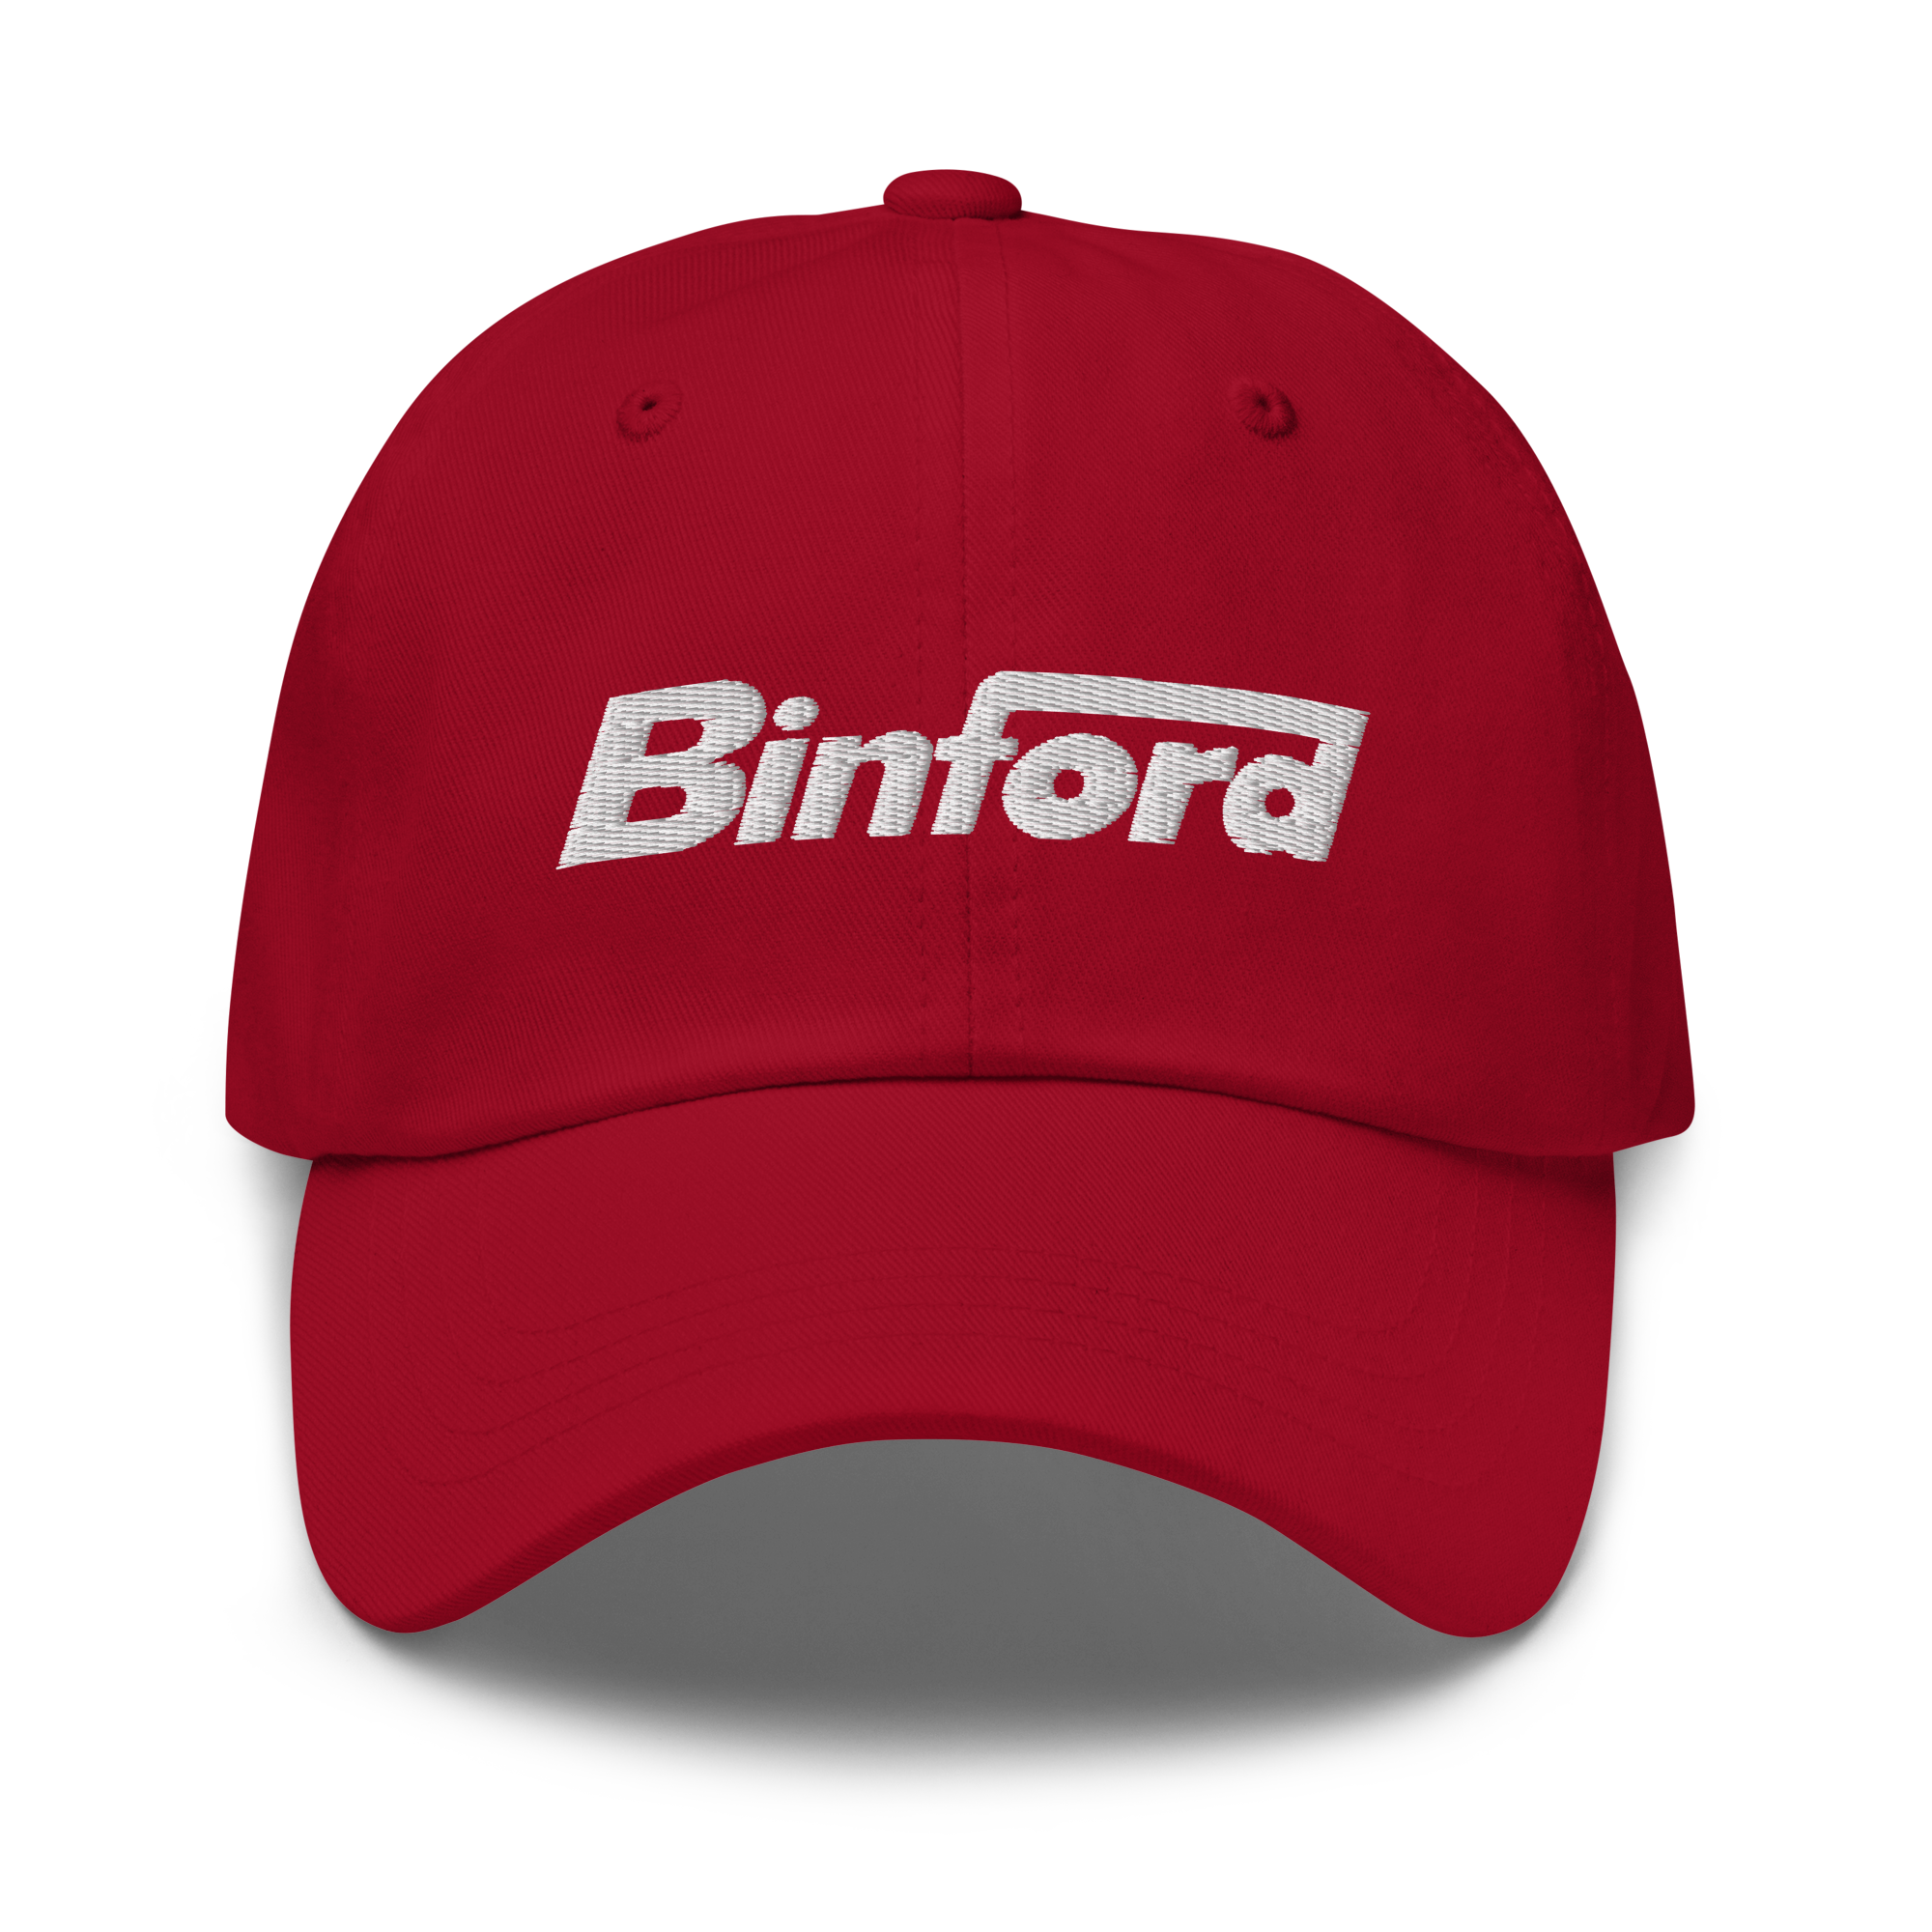 Home Improvement Binford Embroidered Hat